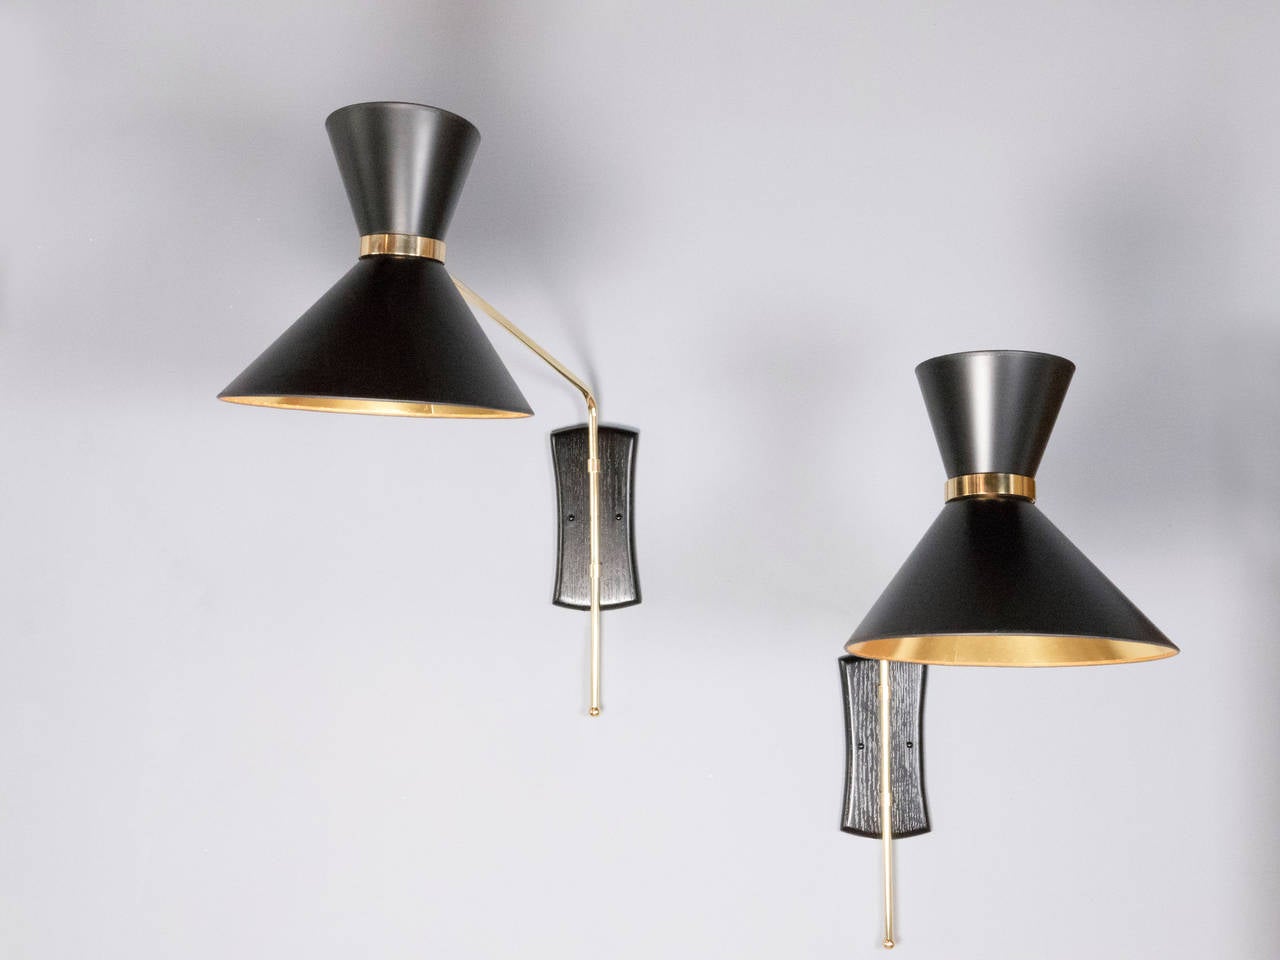 These elegant brass swing arm sconces with double black opaque shades with gold foil lining create a very versatile lighting source. The pivoting arm and swiveling head are fitted with two sockets providing both up and down light. The backplate is